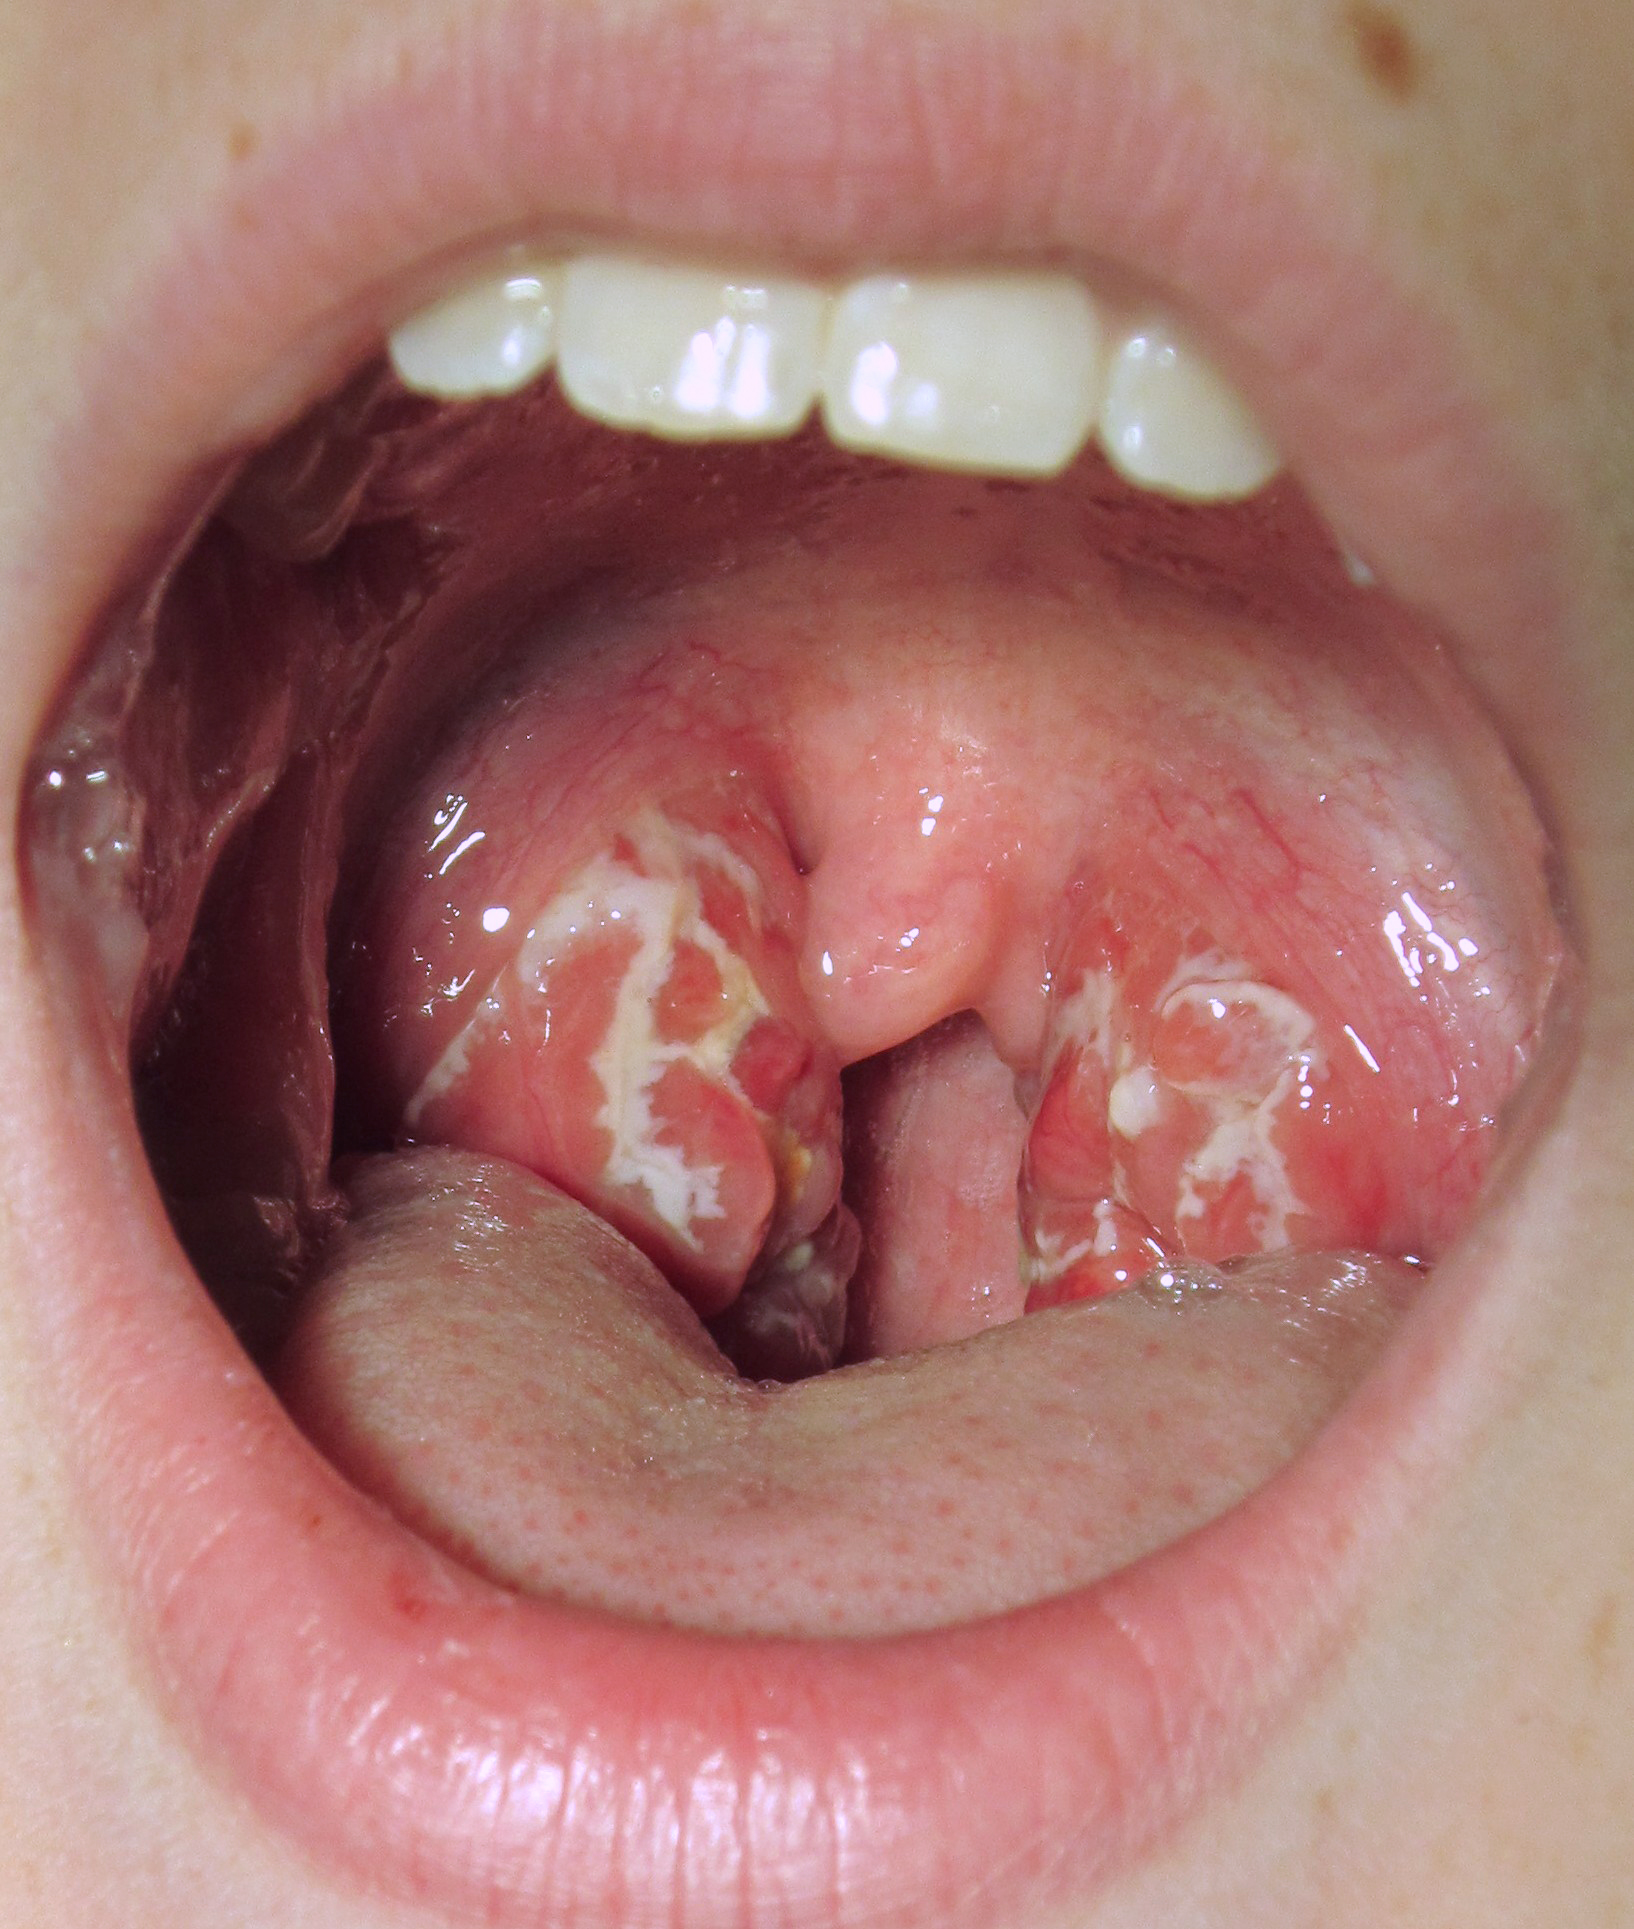 Exudative pharyngitis seen in a patient with a streptococcal infection (source)